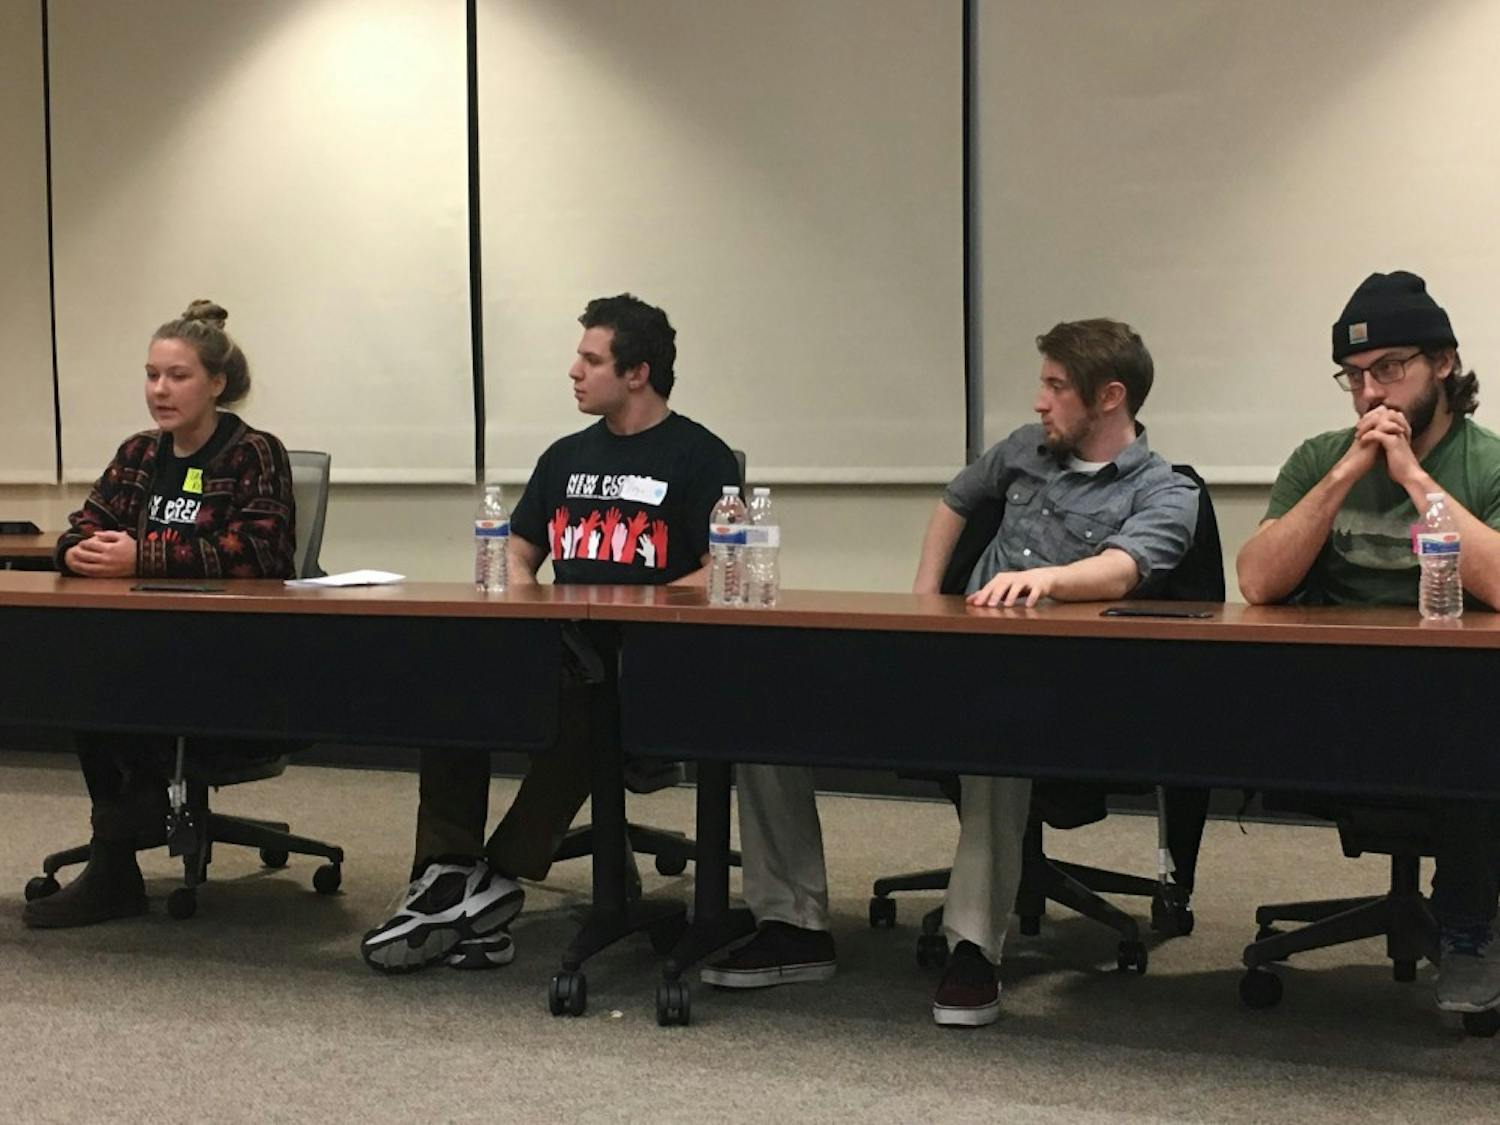 During a panel discussion Associated Students of Madison Legislative Affairs Committee Chair Sally Rohrer said allowing students to opt out of allocable segregated fees would be "a disaster."